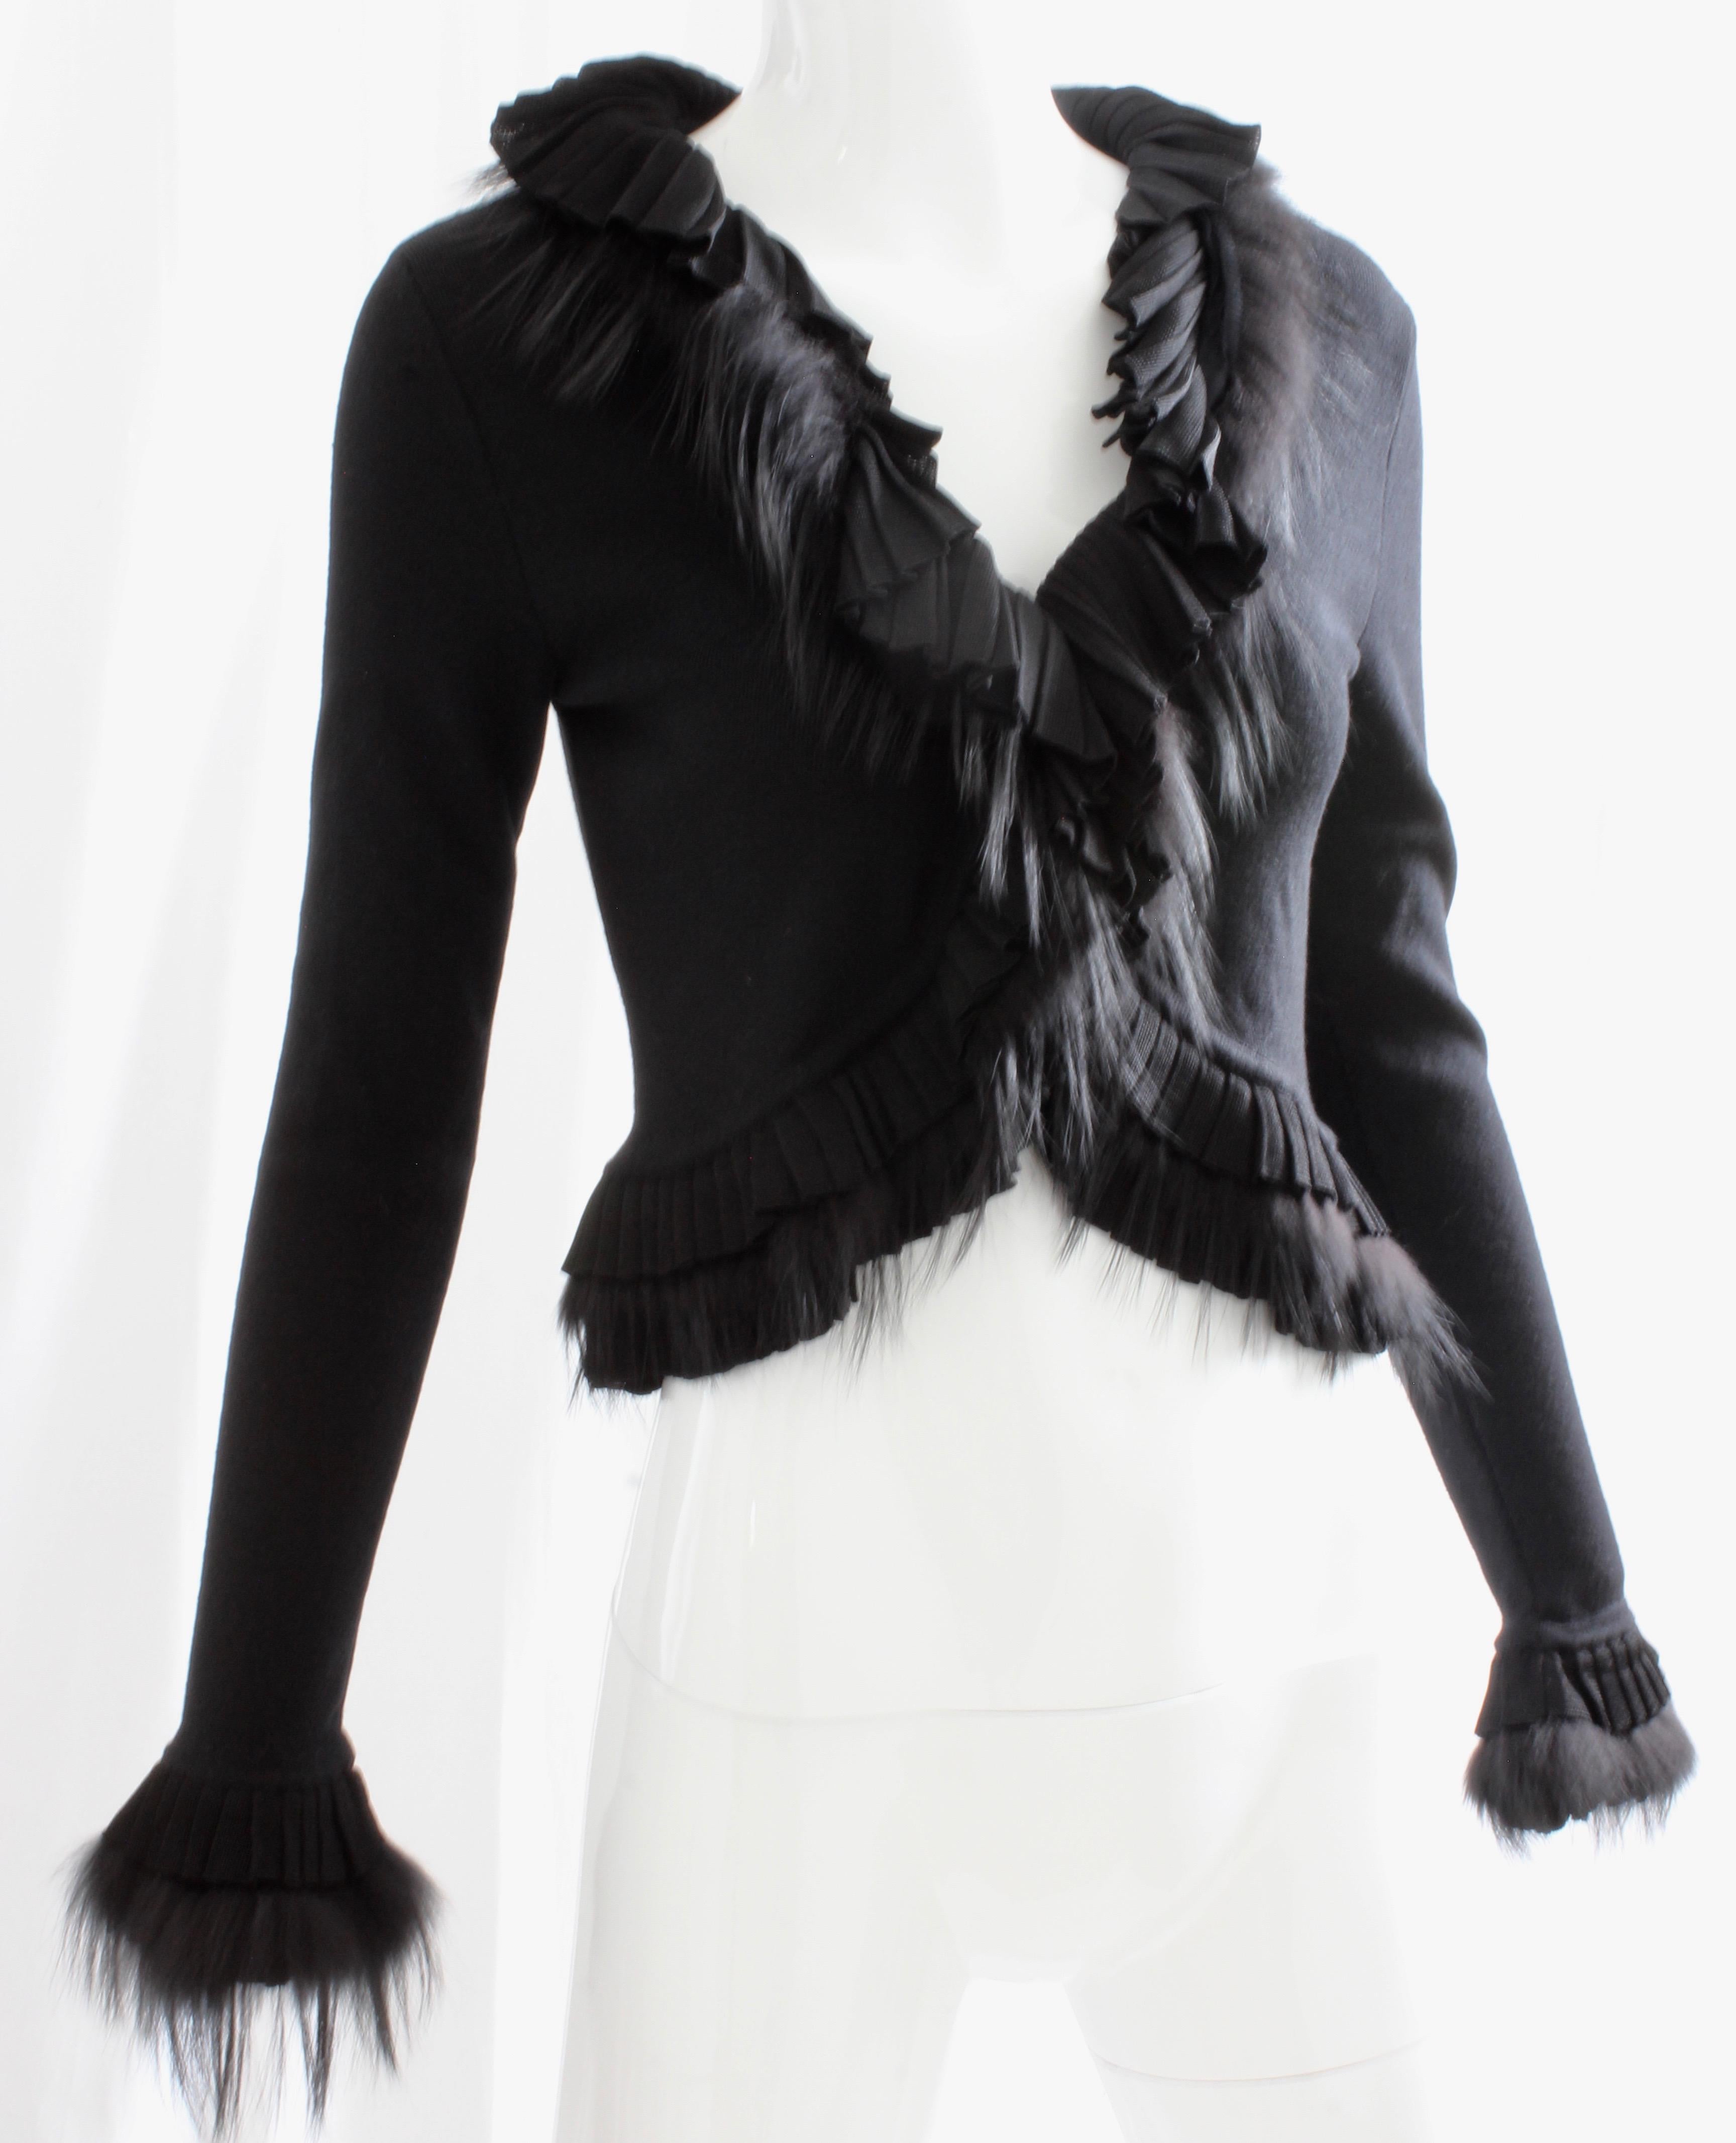 Here's a fabulous black knit shrug with fur trim and knit ruffle detailing from Roberto Cavalli.  Tagged size 40, it measures: shoulders - 16in, bust - 35in, waist - 27in, sleeves - 25in, shoulder to hem - 17.5in. Unlined; fastens with two hook/eye